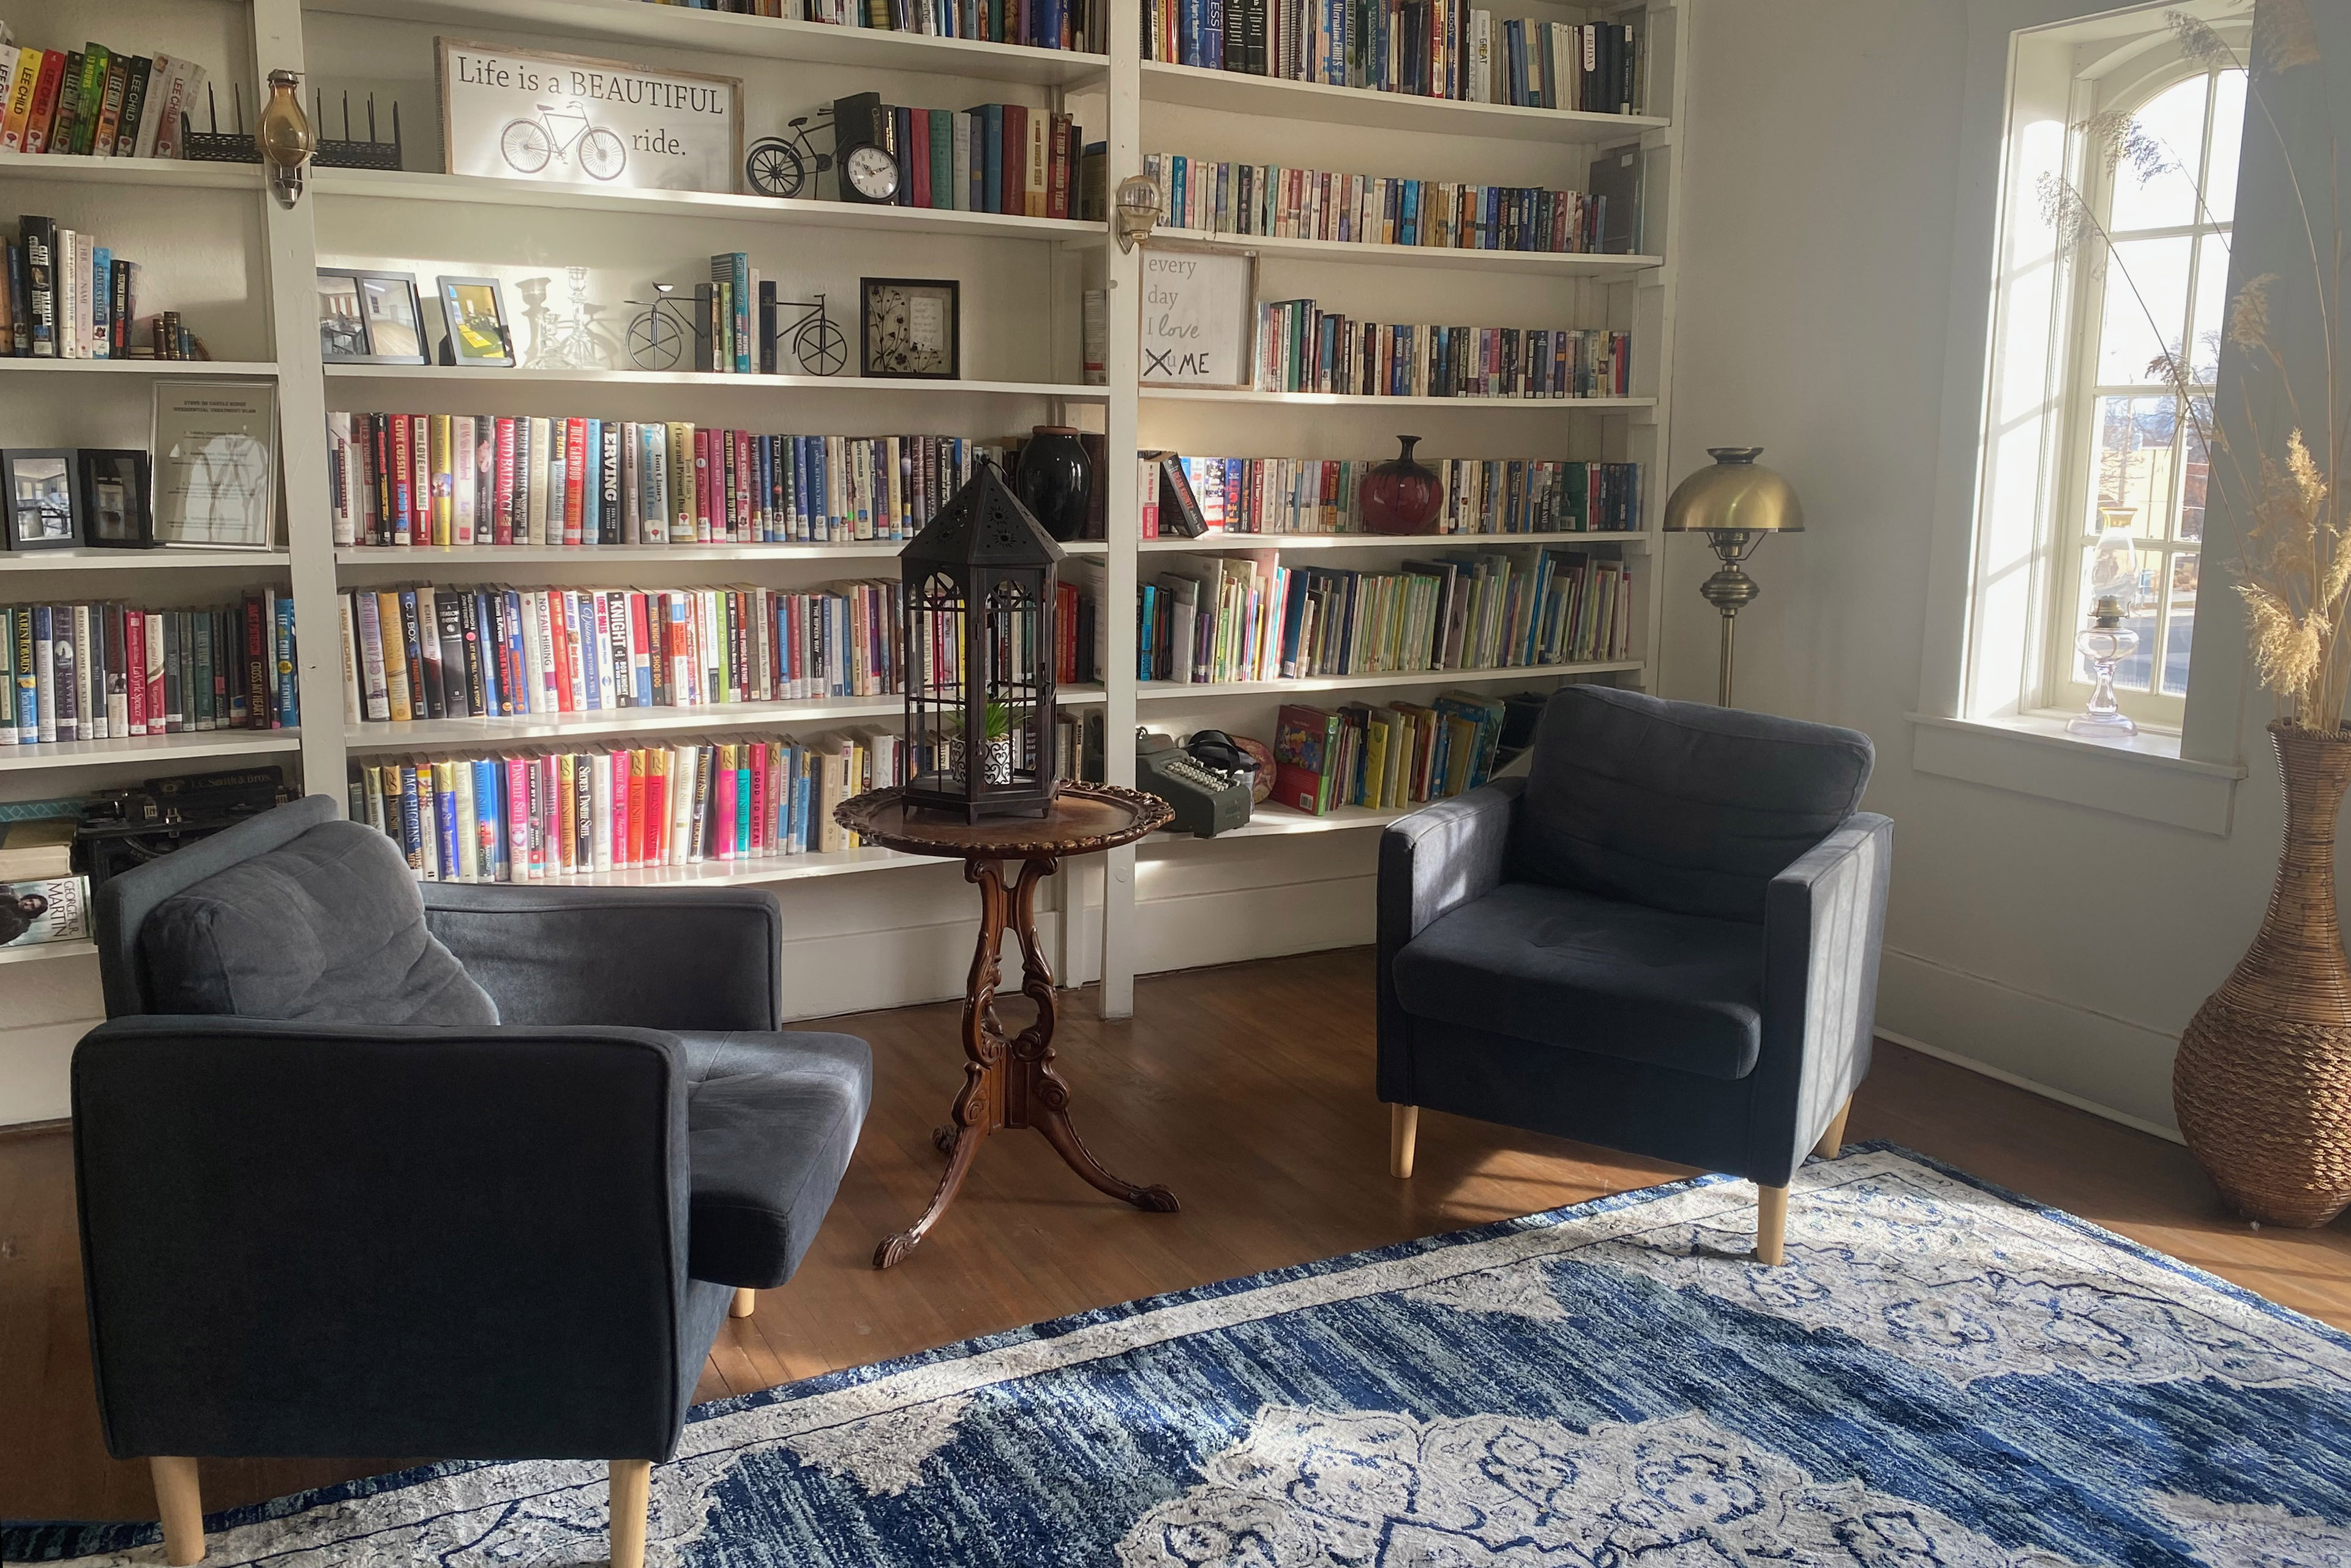 A room with two cushioned blue chairs in the center and a blue rug. The walls are lined with floor-to-ceiling bookshelves, filled with books with colorful spines. A window, on the right wall, lets in bright sunlight.